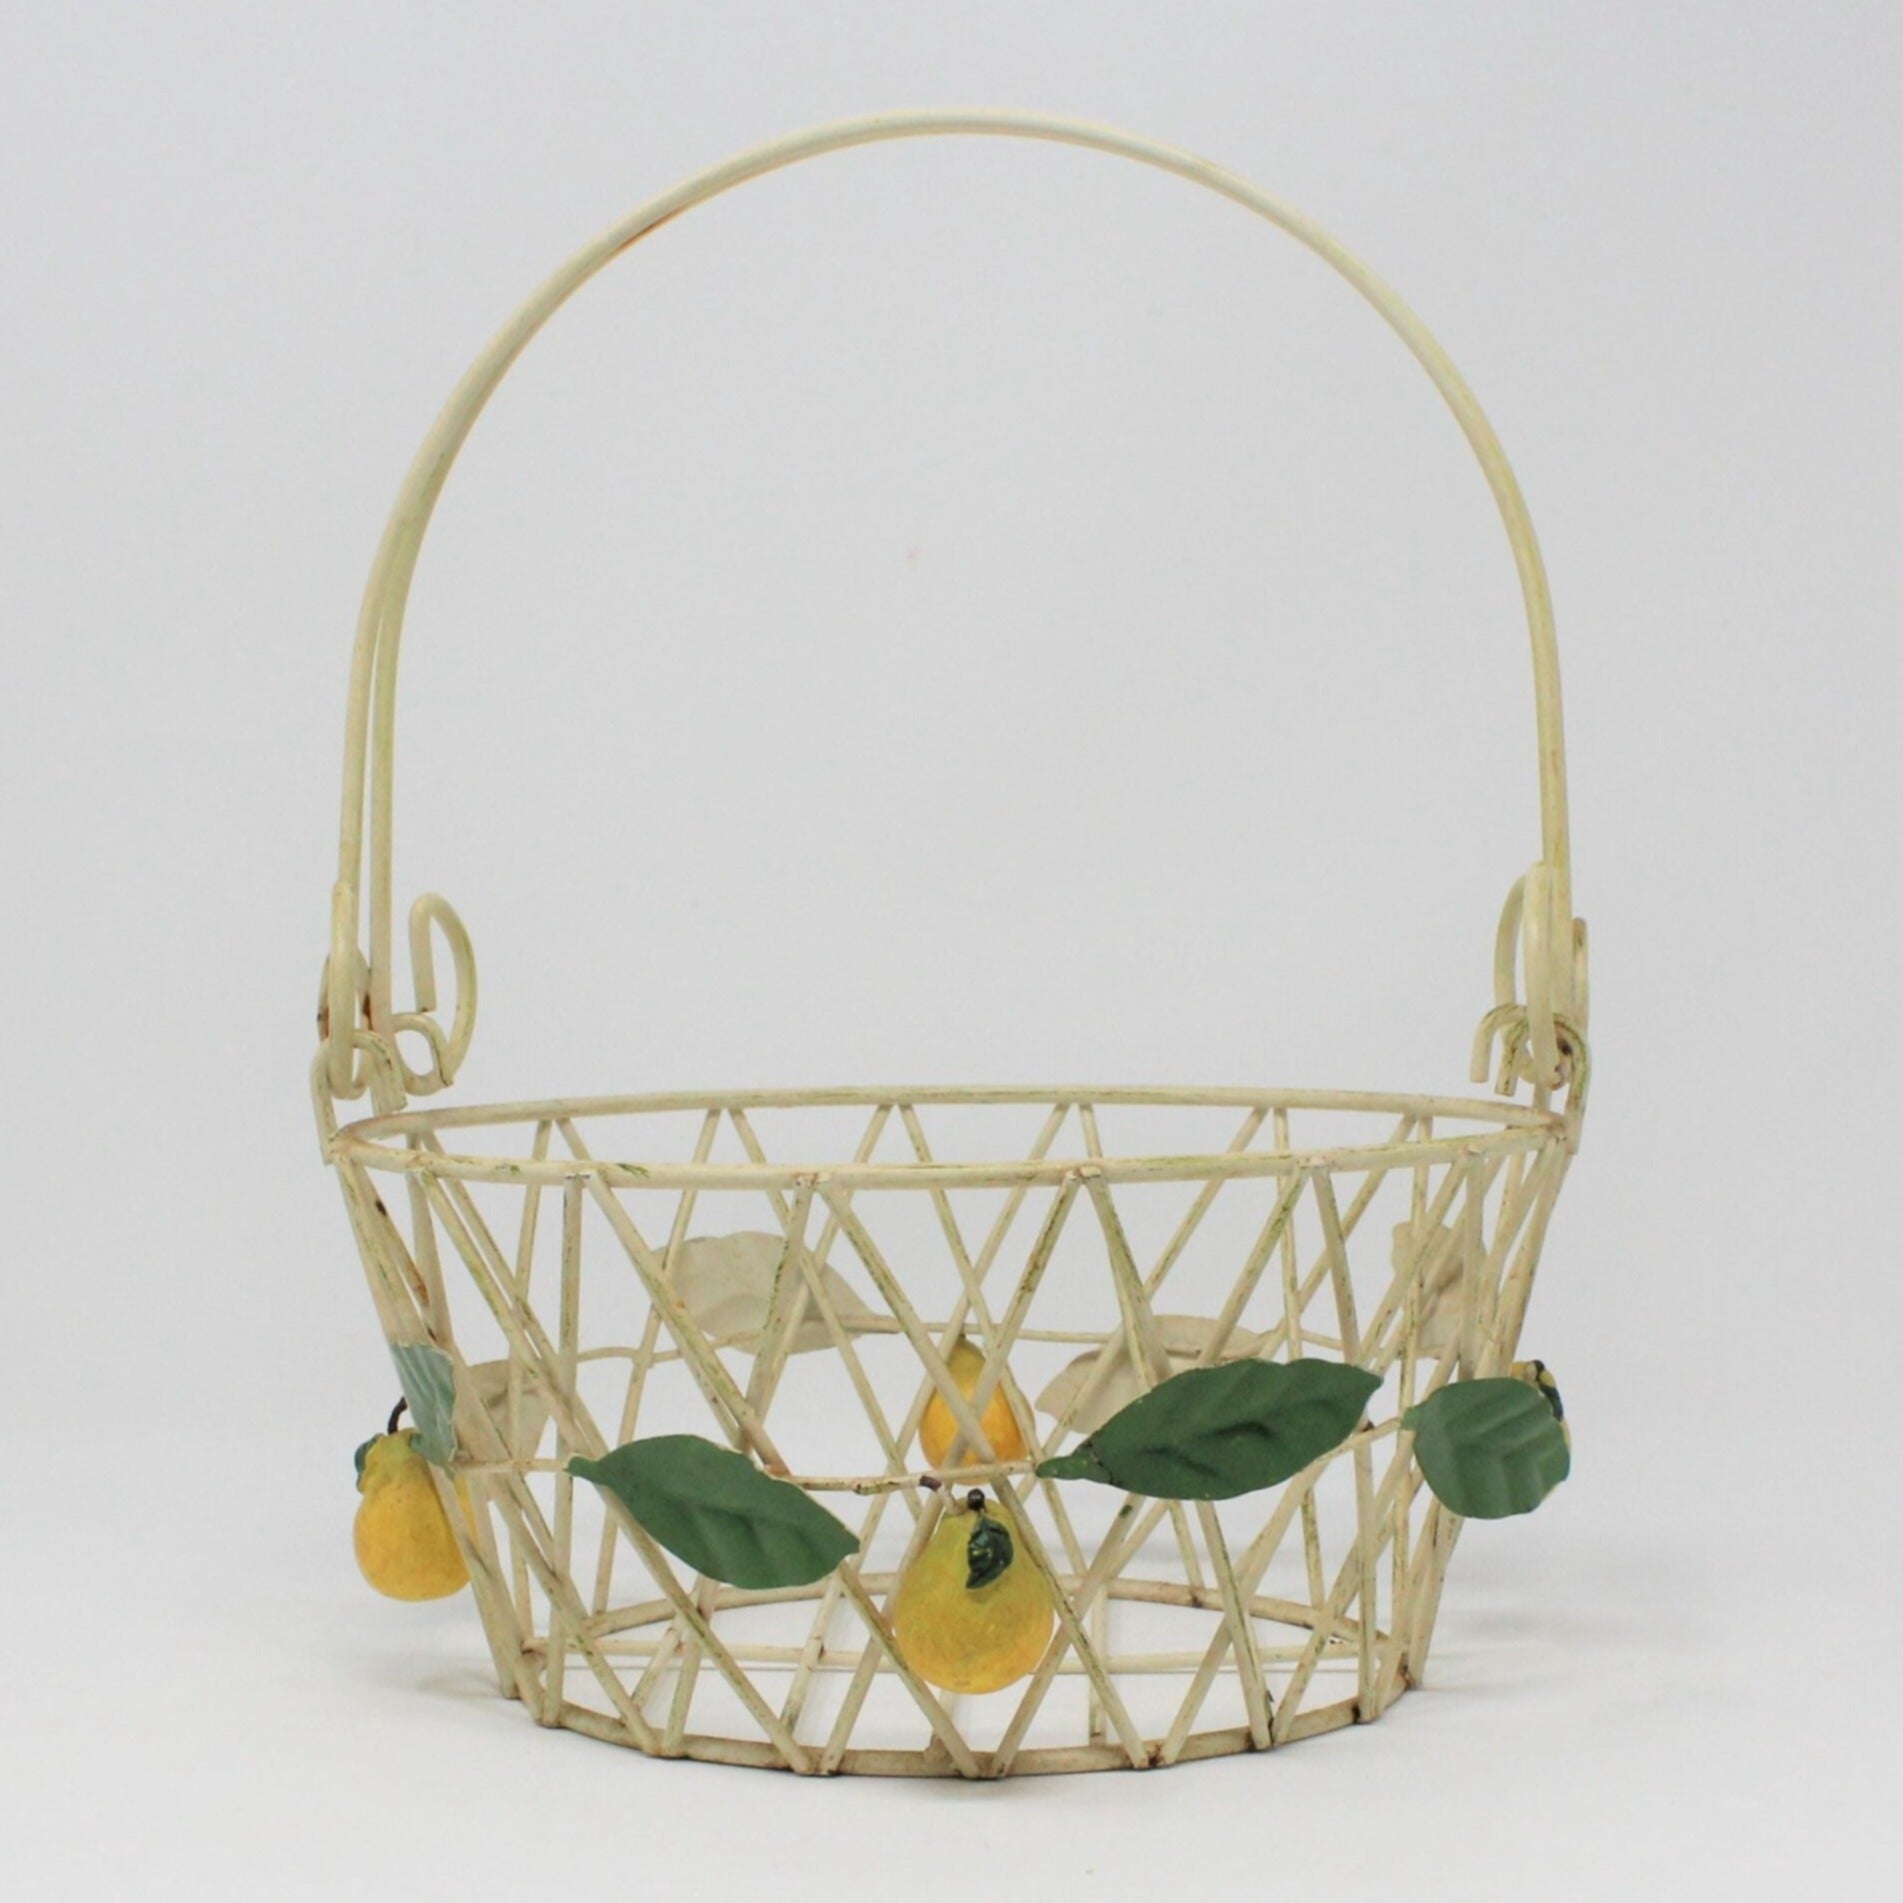 Vintage wire basket w/hand applied pears, rustic